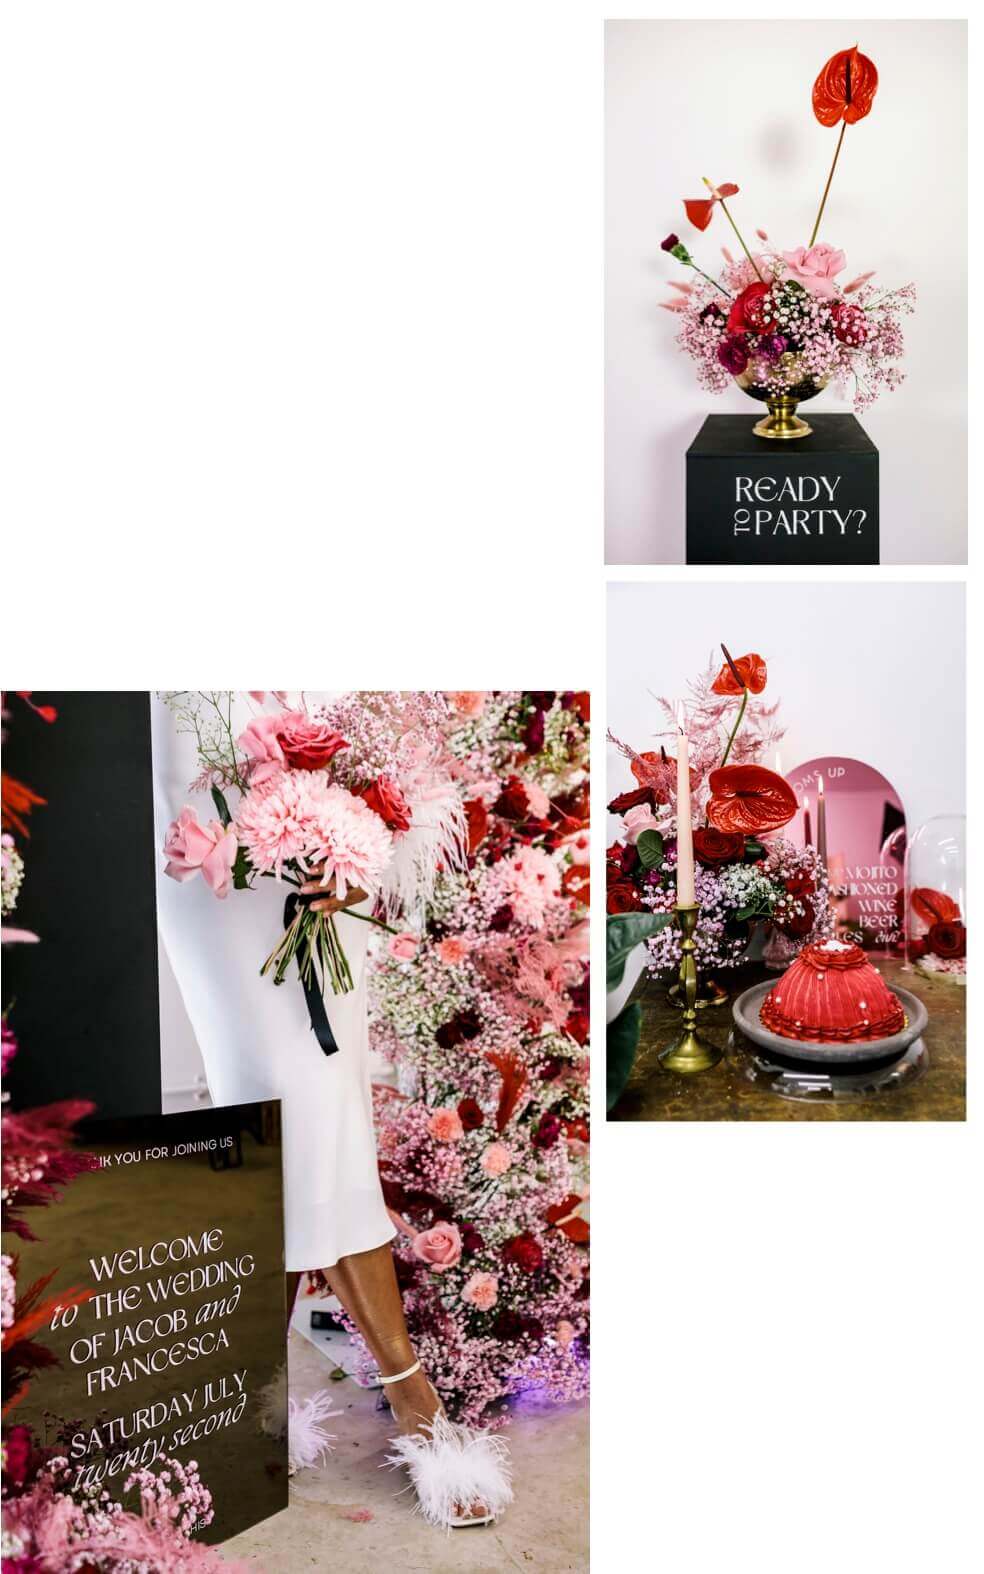 Three photos of some modern bright pink and red floral displays. One shows the bouquet in a vase, sitting on top of a plinth, printed with the words 'ready to party?'. One shows the same flowers on a table next to a pink mirror and red cake and one features similar flowers with the lower half of a woman wearing a white dress and fluffy white high heeled shoes visible next to them.